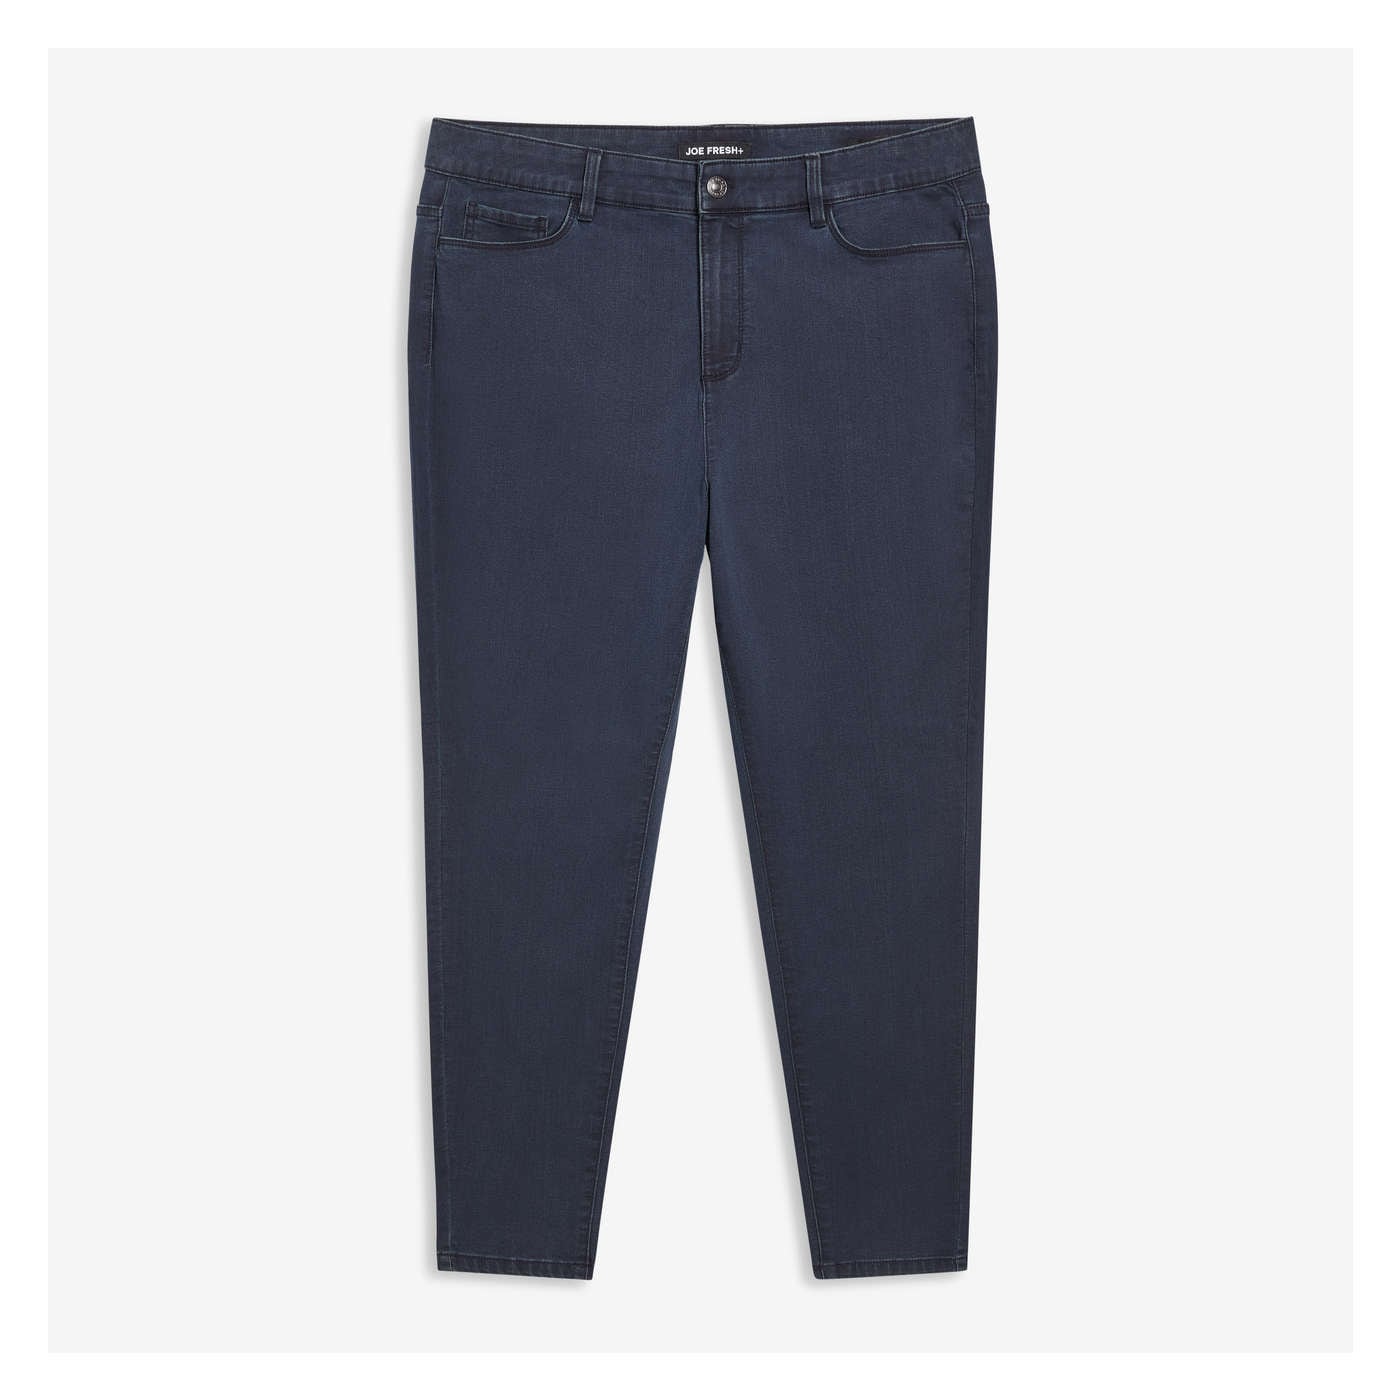 Buy Uniqlo Ultra Stretch Denim Leggings Pants at affordable prices